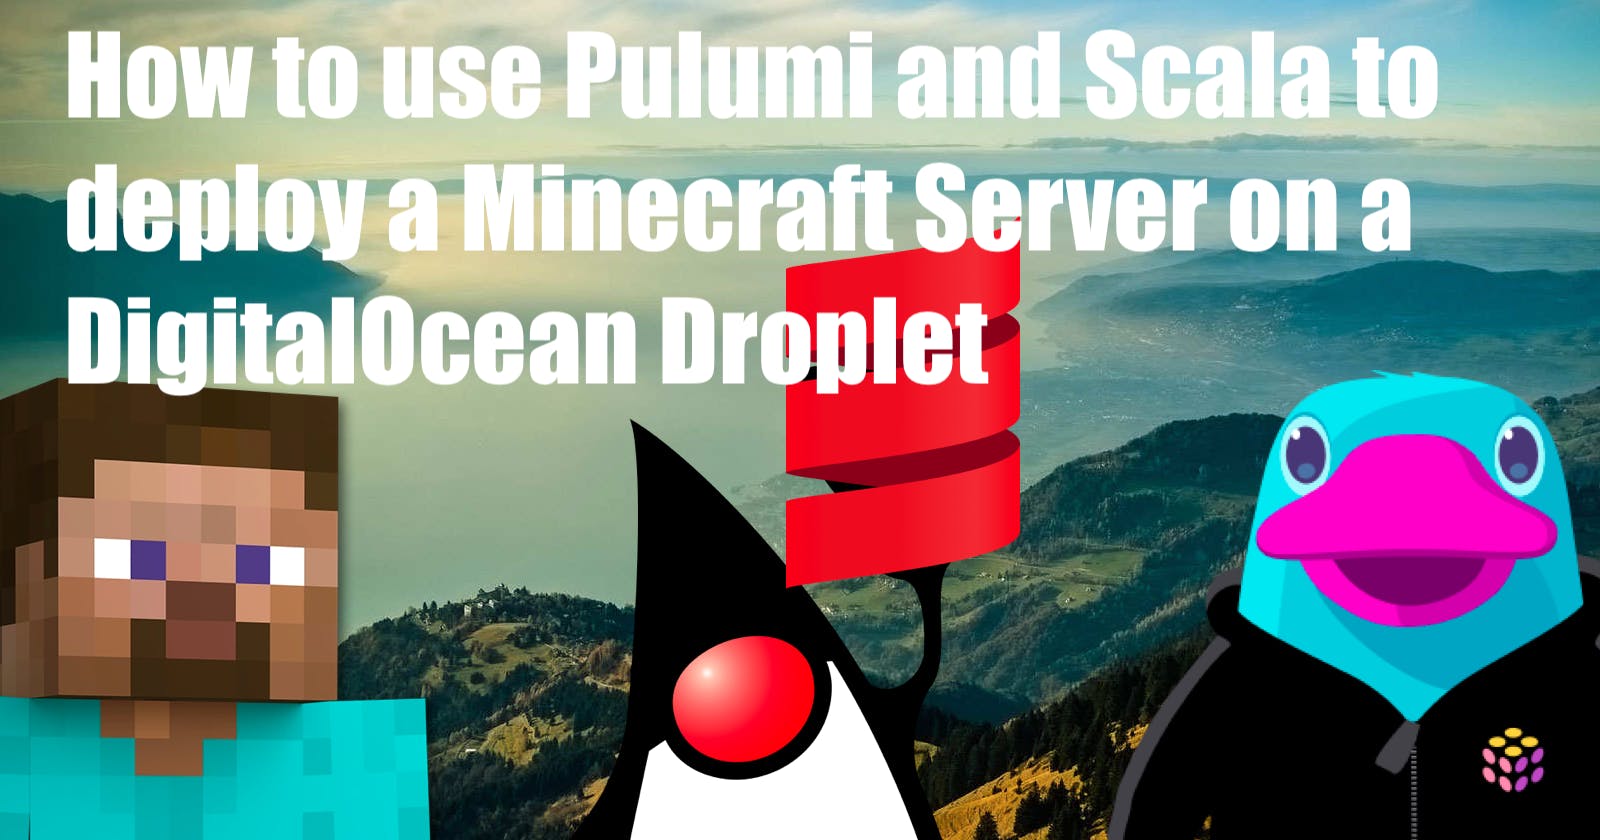 How to use Pulumi and Scala to deploy a Minecraft Server on a DigitalOcean Droplet